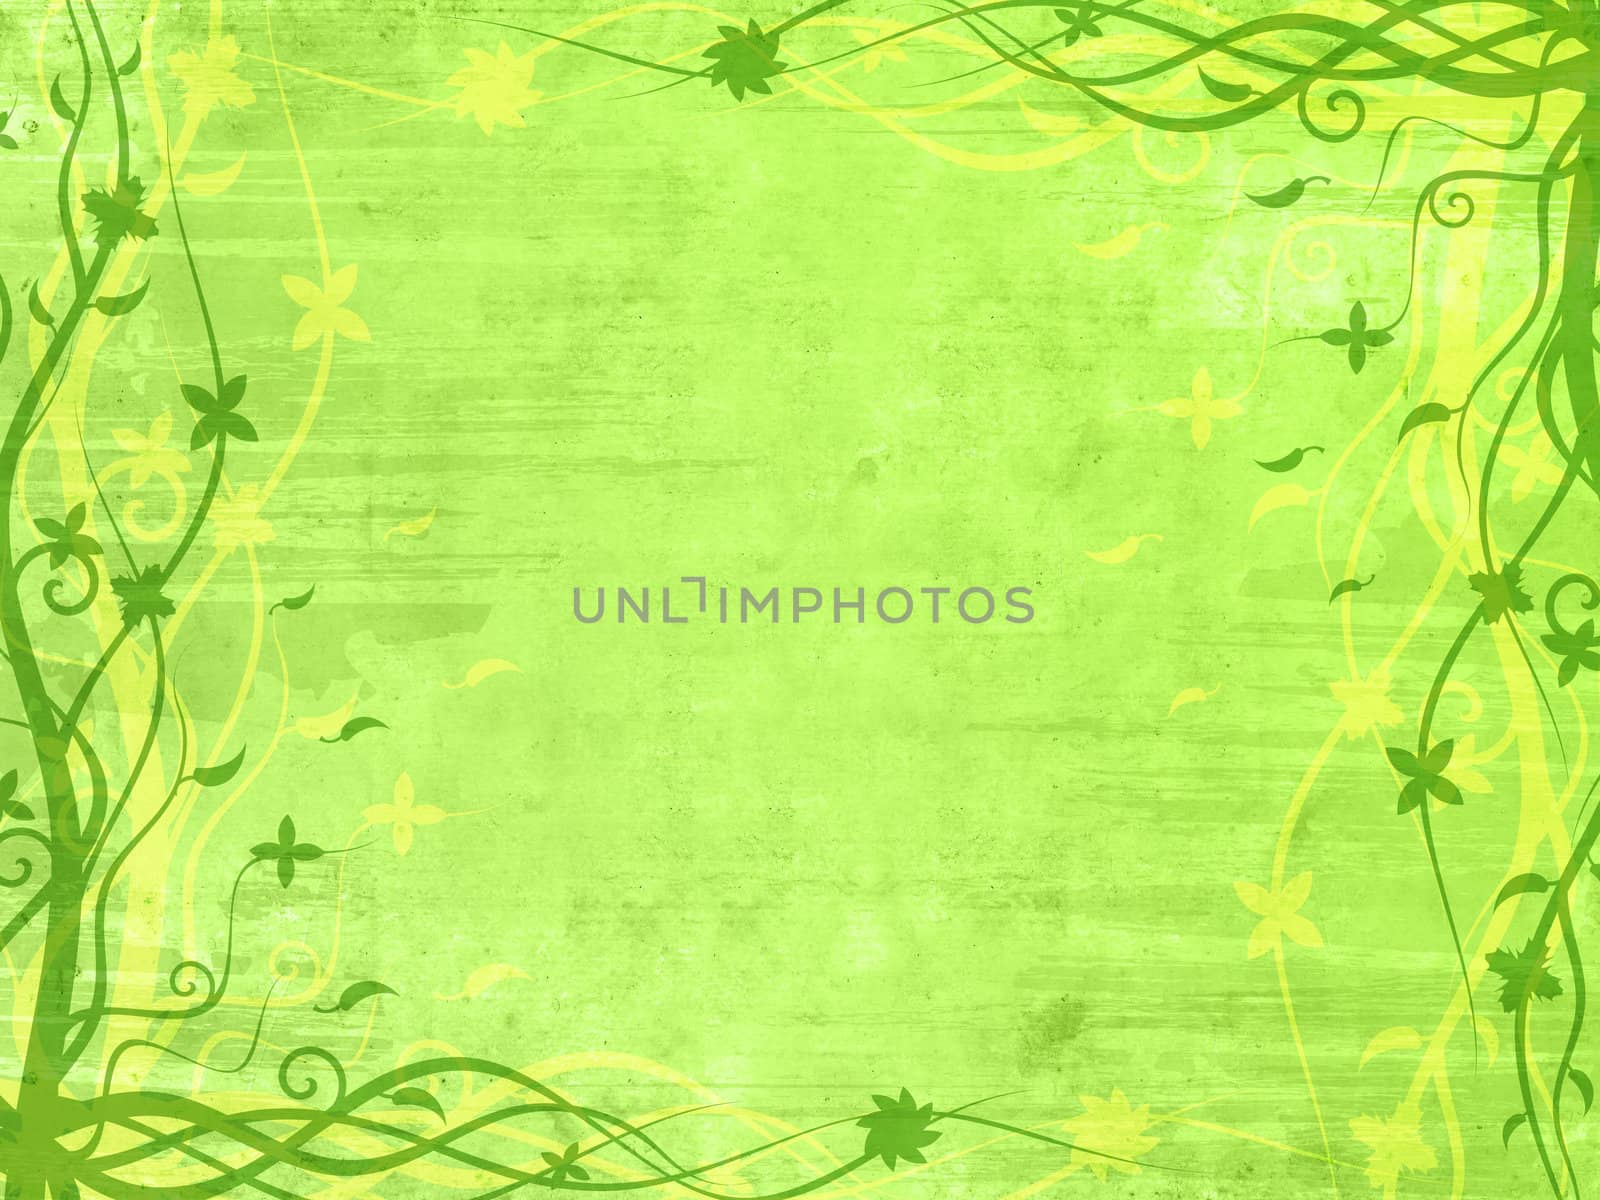 Green frame with floral patterns and splashes